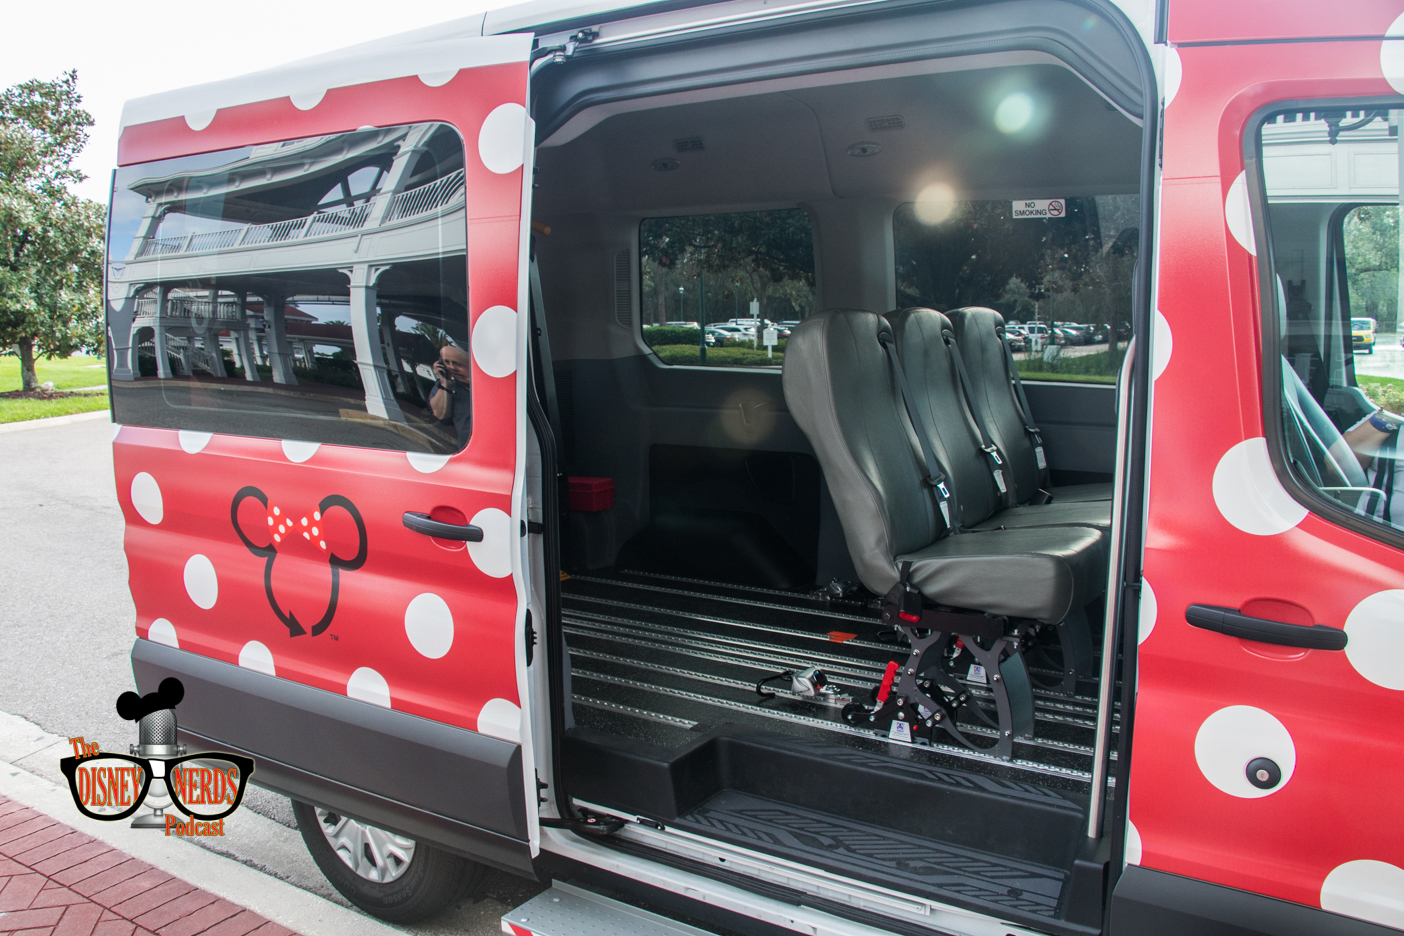 Have someone in your travel party in an ECV or Wheelchair? There's a Minnie Van for you, too! - Minnie Vans at Walt Disney World, A Nerds' Report Thedisneynerdspodcast.com